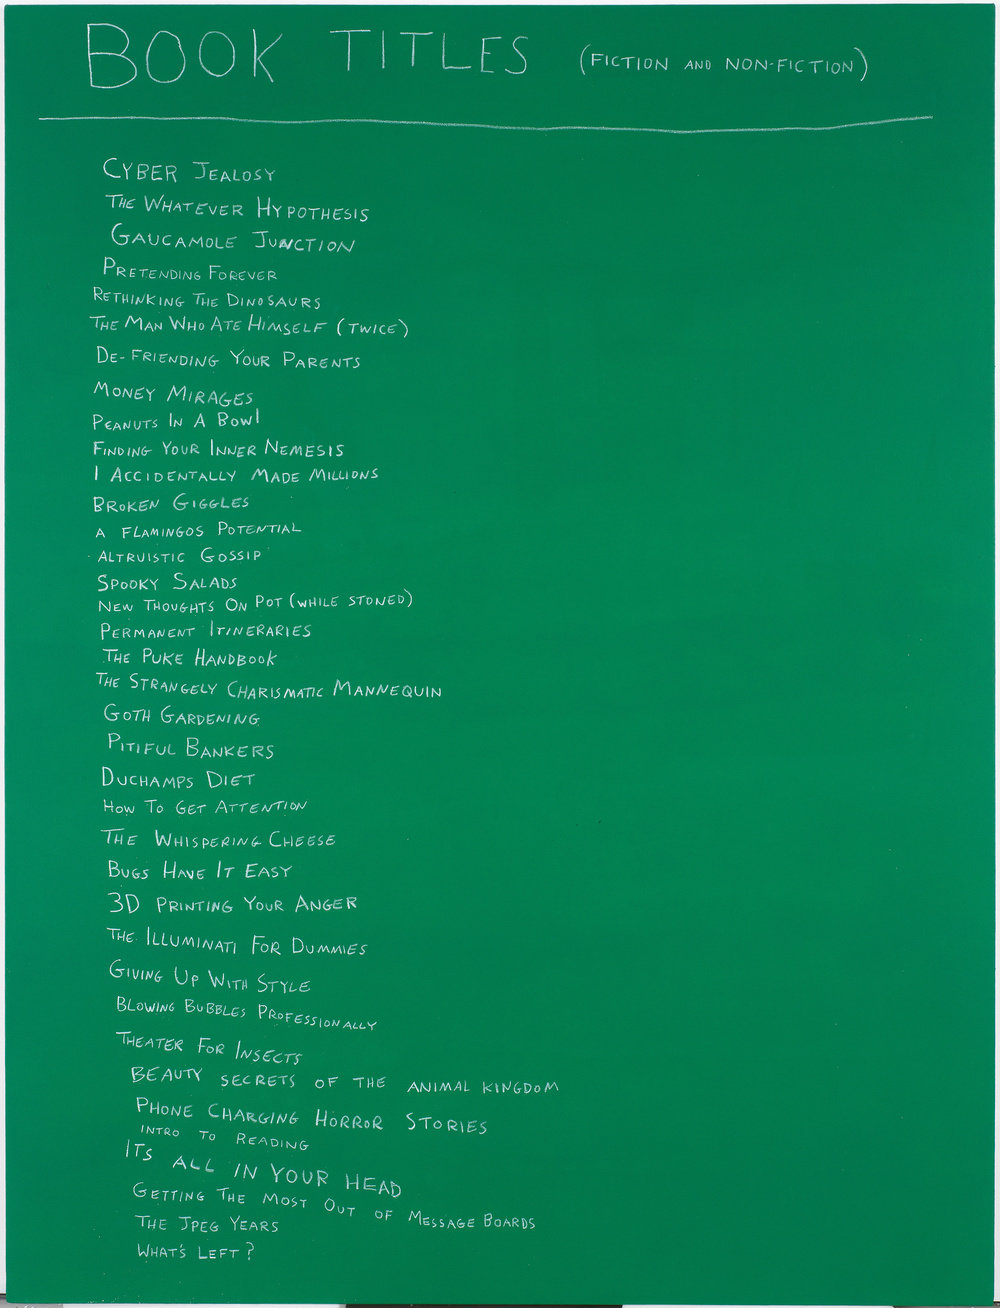 Reeder, book titles (fiction and non fiction), 2015, wax pastel and acrylic on canvas, 64 x 48 in. 162.56 x 121.92 cm cnon 56.285 photo credit bill orcutt